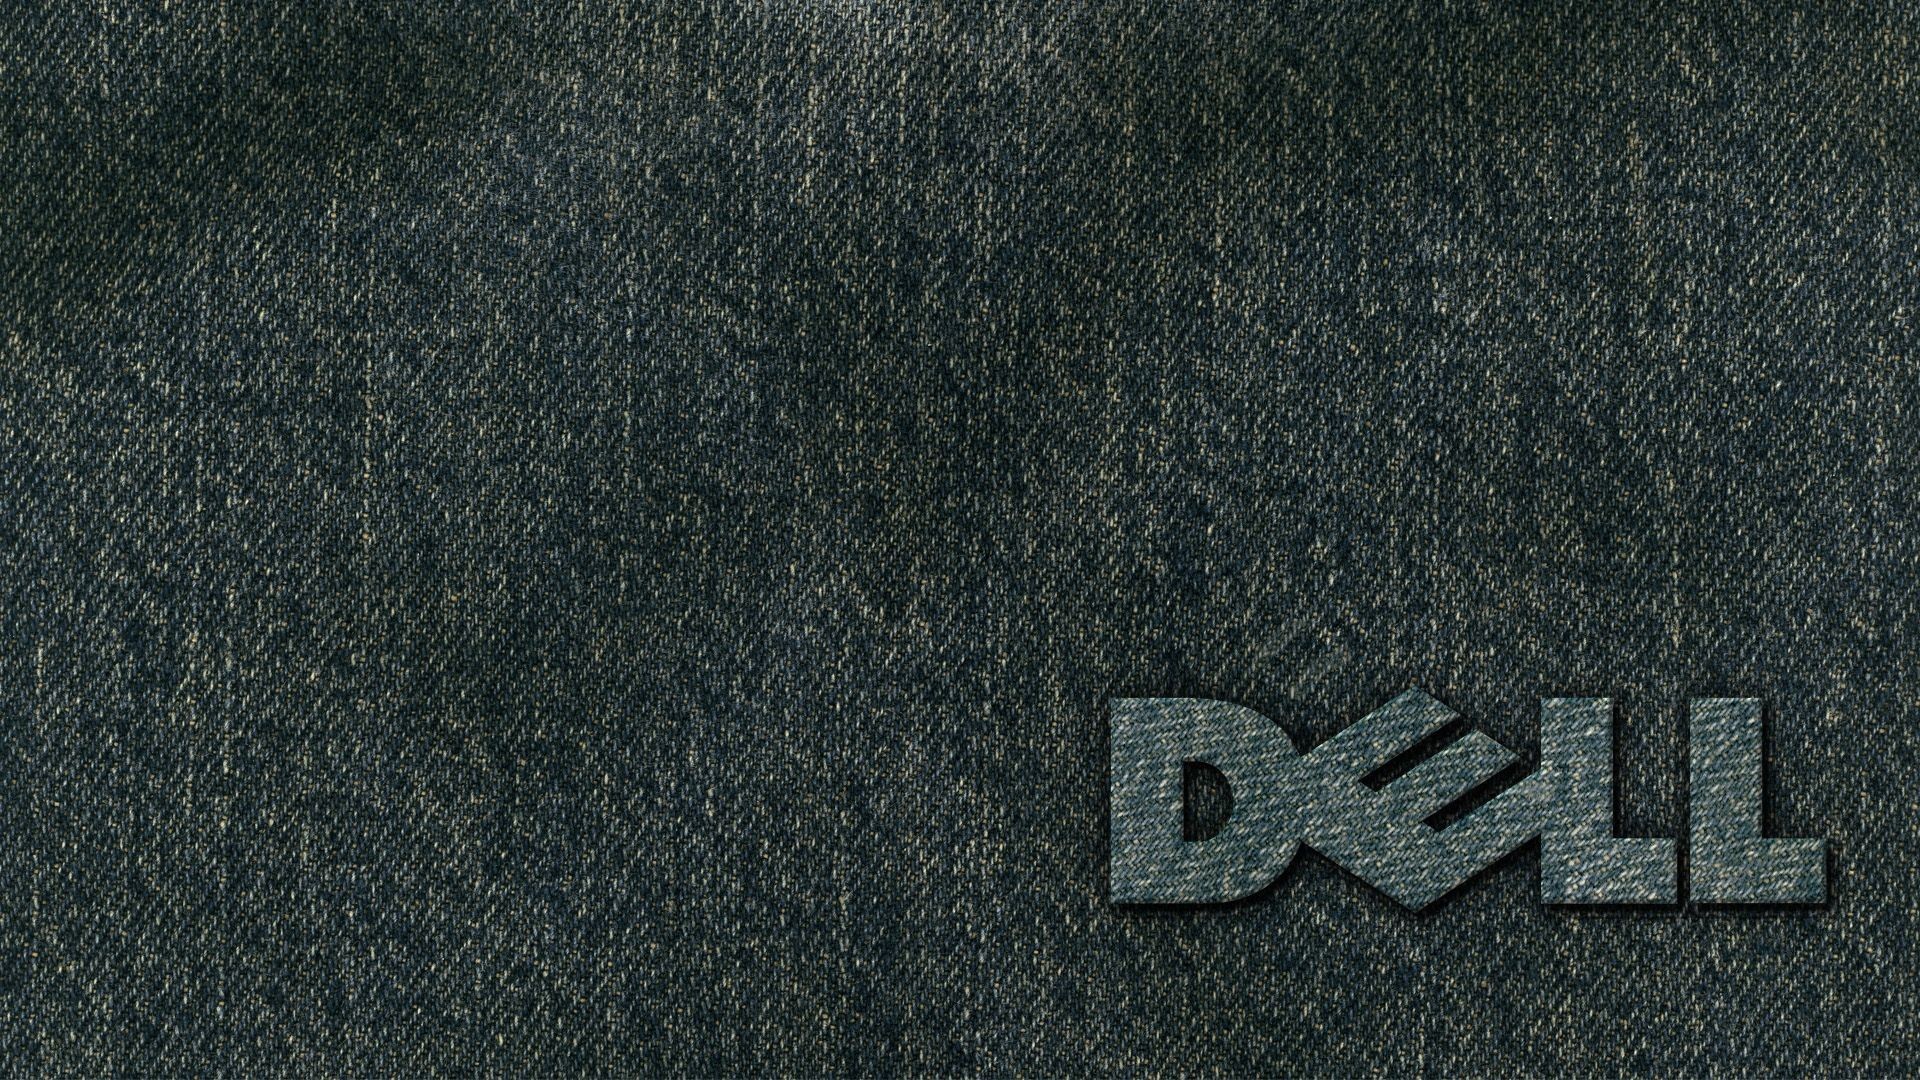 1920x1080 Dell. Download Free Dell Wallpapers 